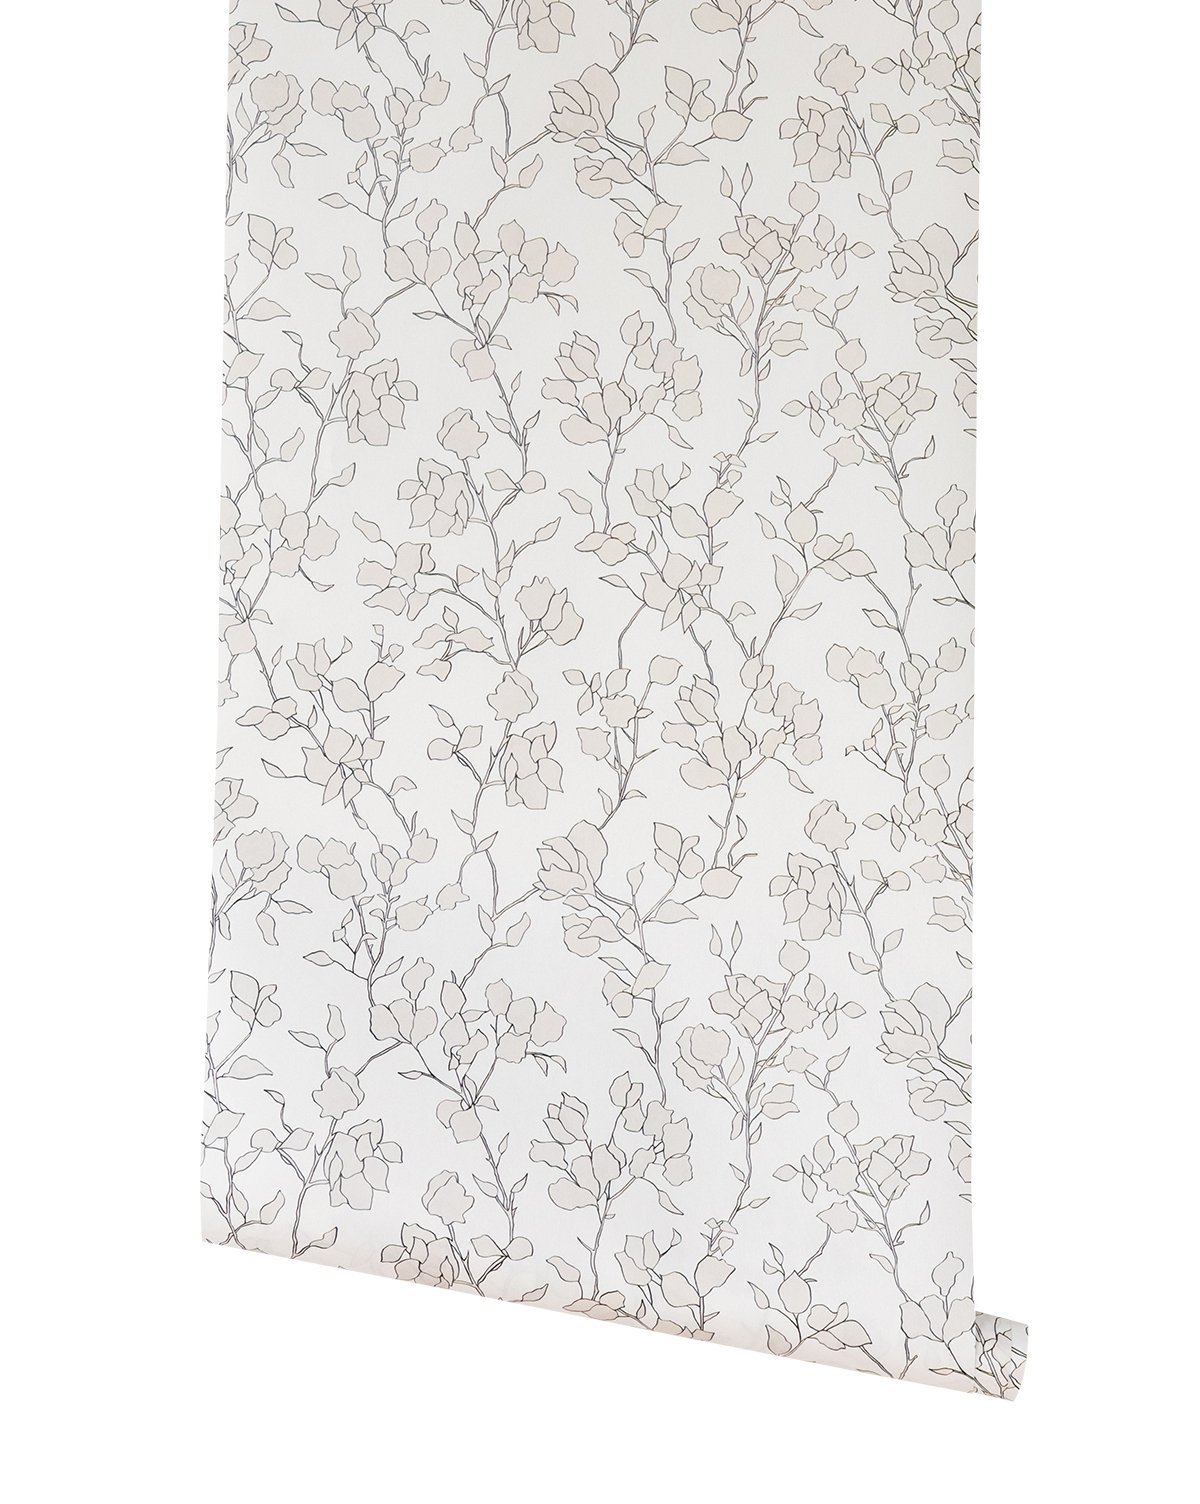 Blair Sketched Floral Wallpaper Mcgee Co